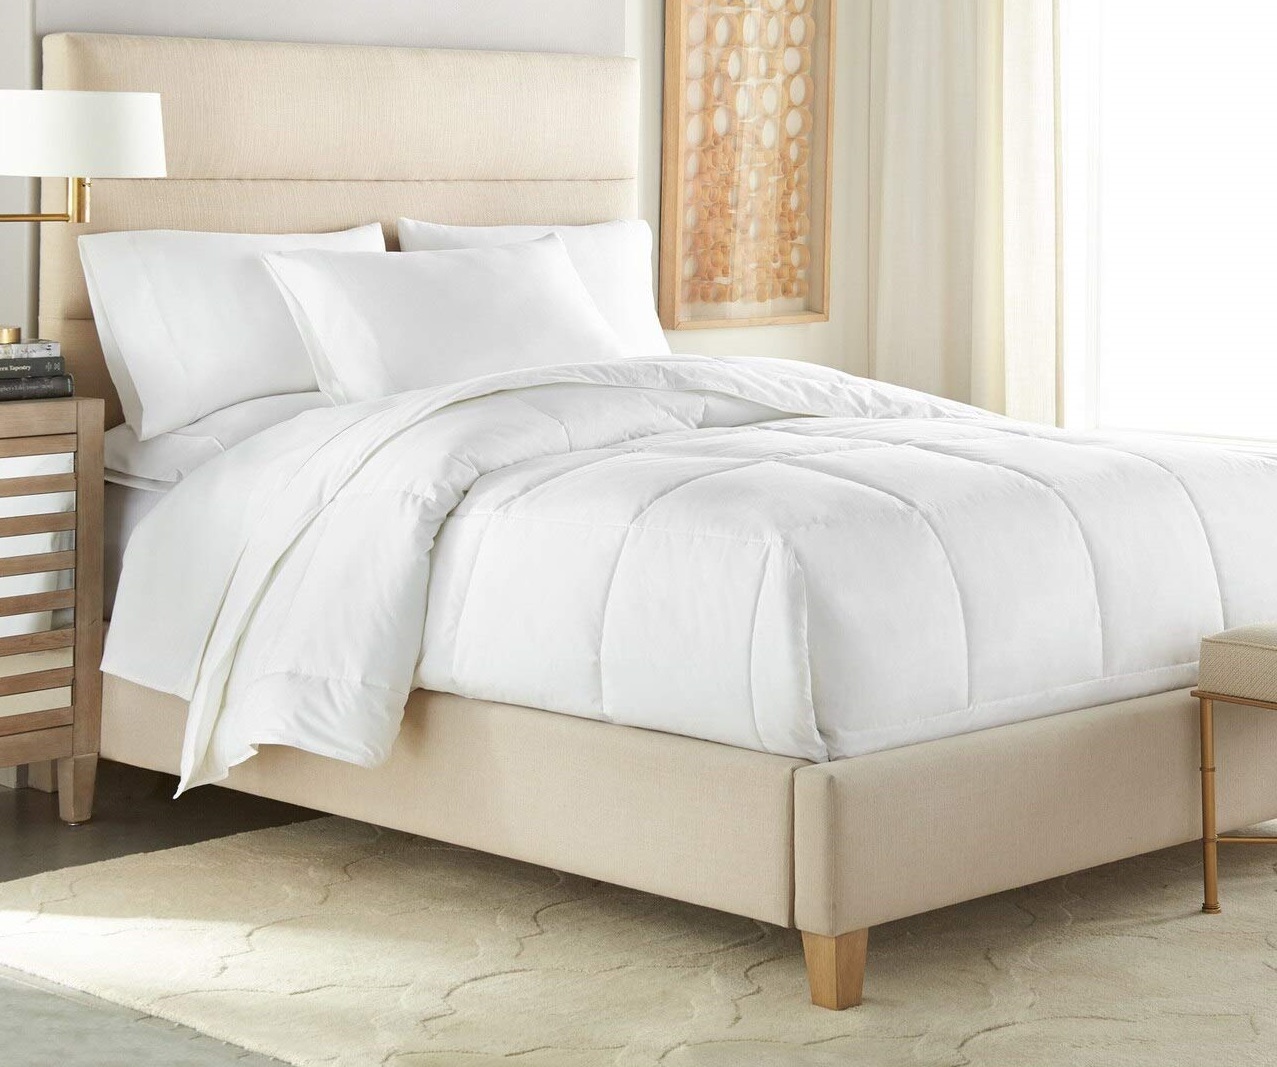 a white Downlite down alternative comforter on a bed